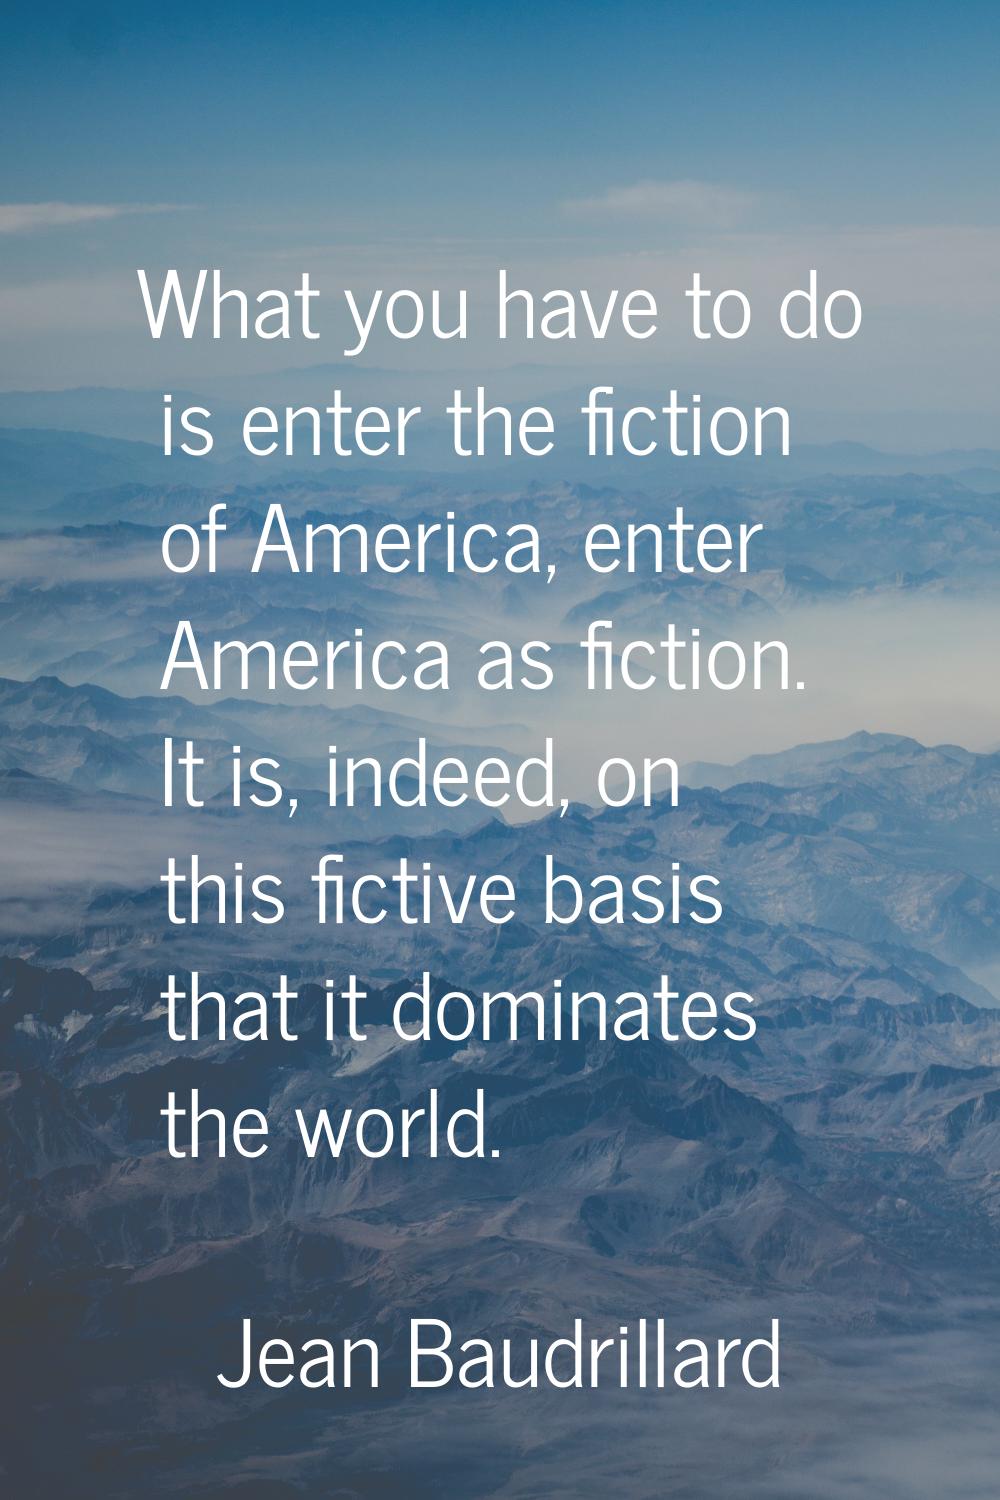 What you have to do is enter the fiction of America, enter America as fiction. It is, indeed, on th